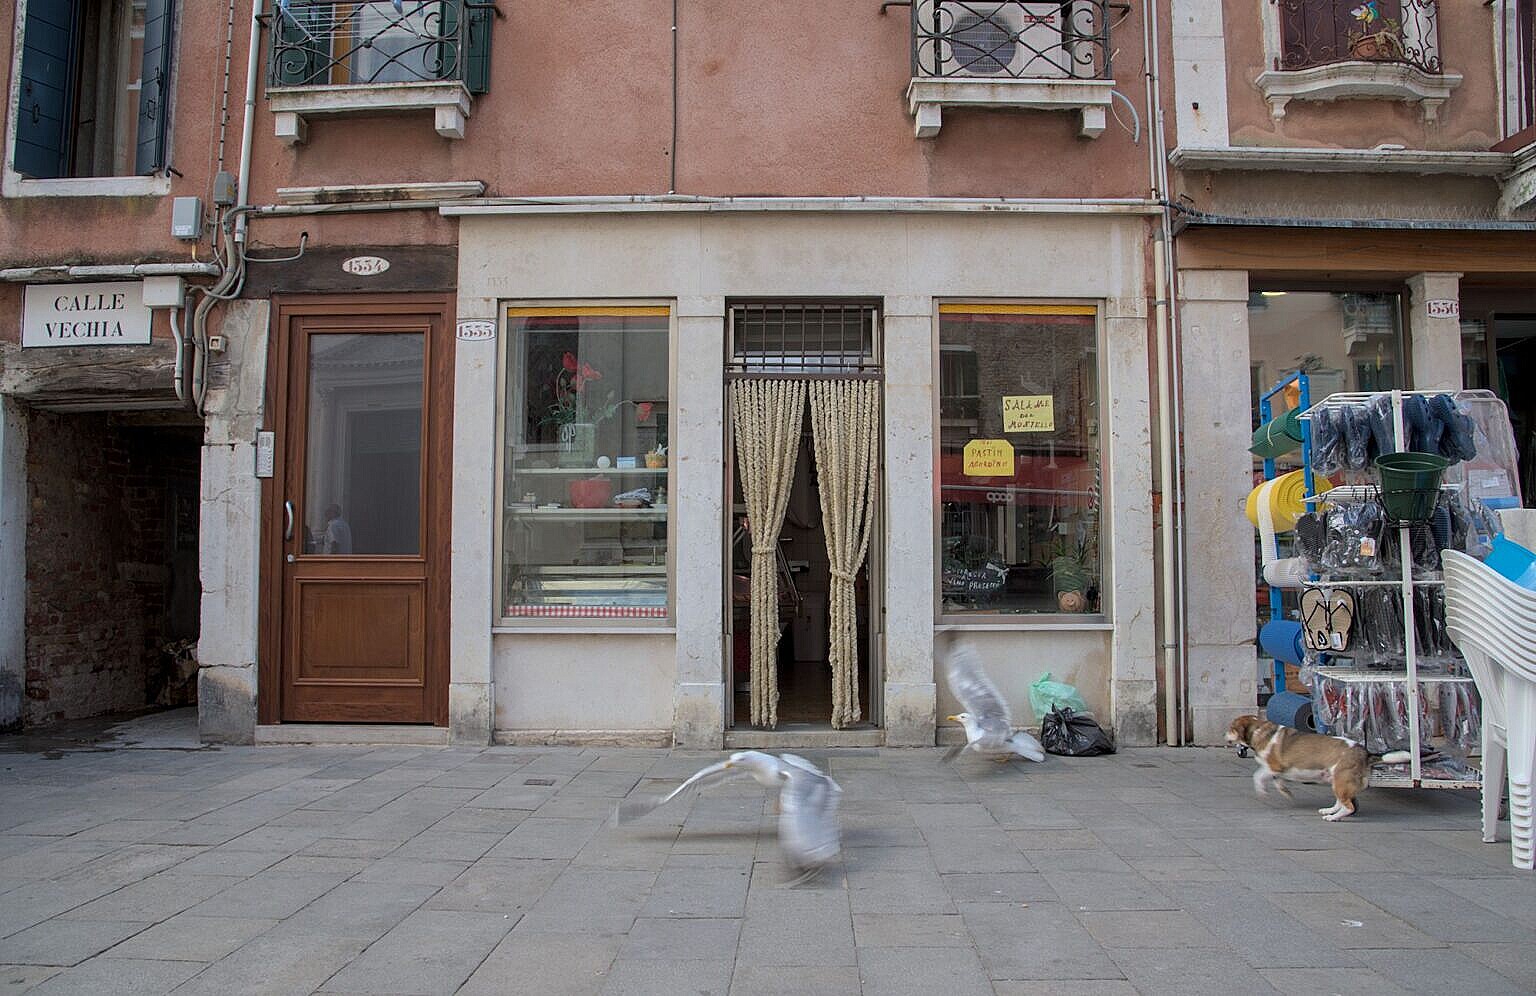 Dog and seagulls competing for the butcher's garbage in Via Garibaldi